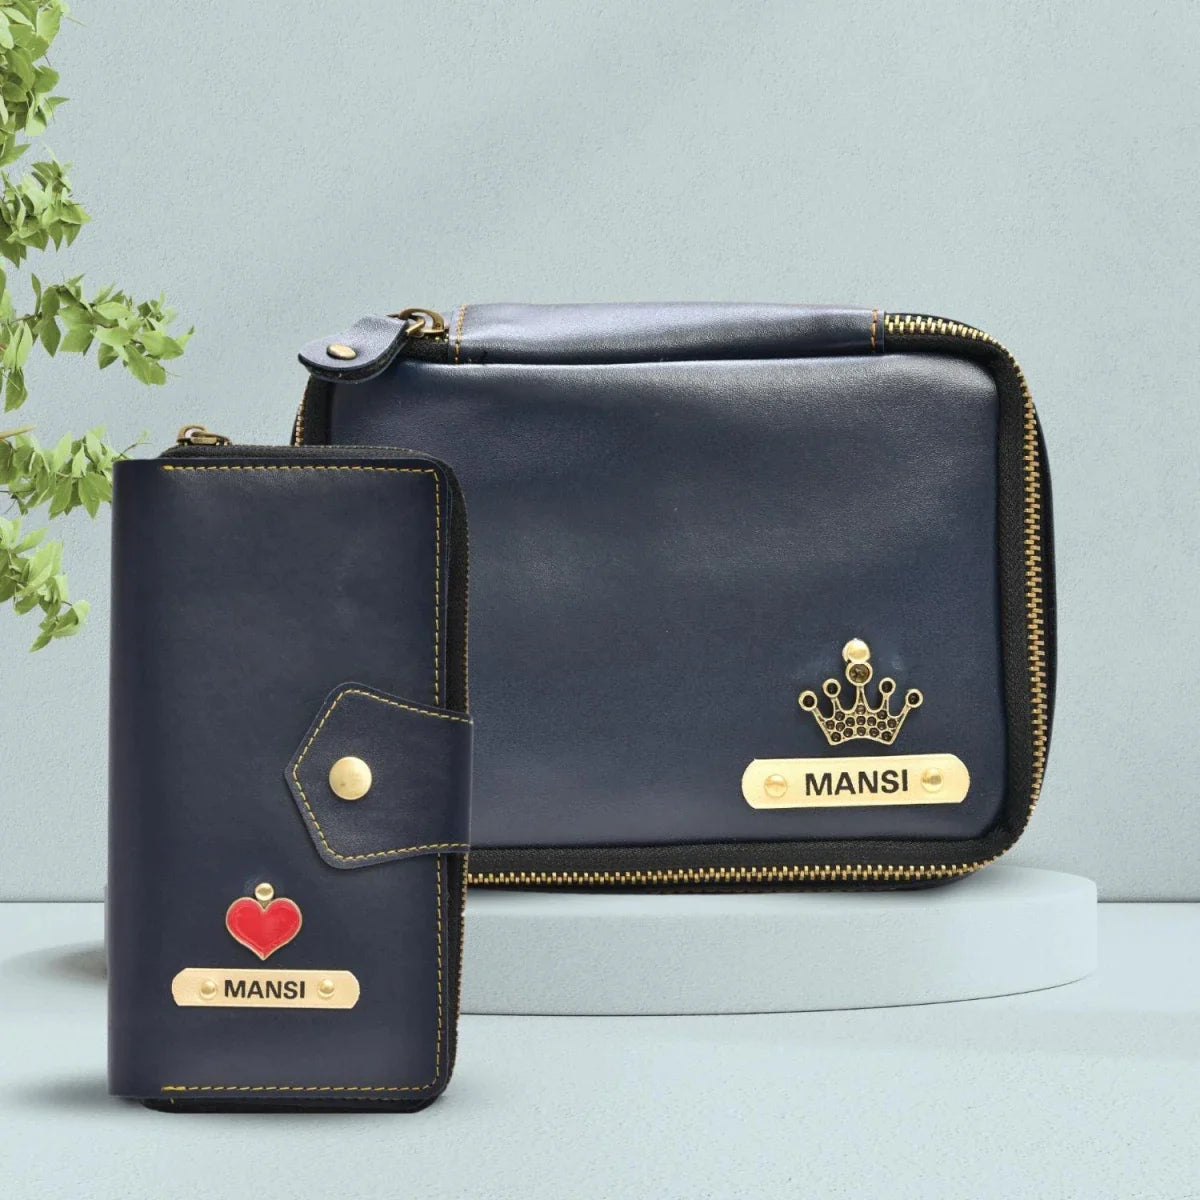 The Women's Combo - Mini Makeup Kit & zip around lady Wallet is a thoughtful and practical gift for the woman who loves to travel. It's perfect for gifting to your friend in Coimbatore, who is always planning her next adventure.